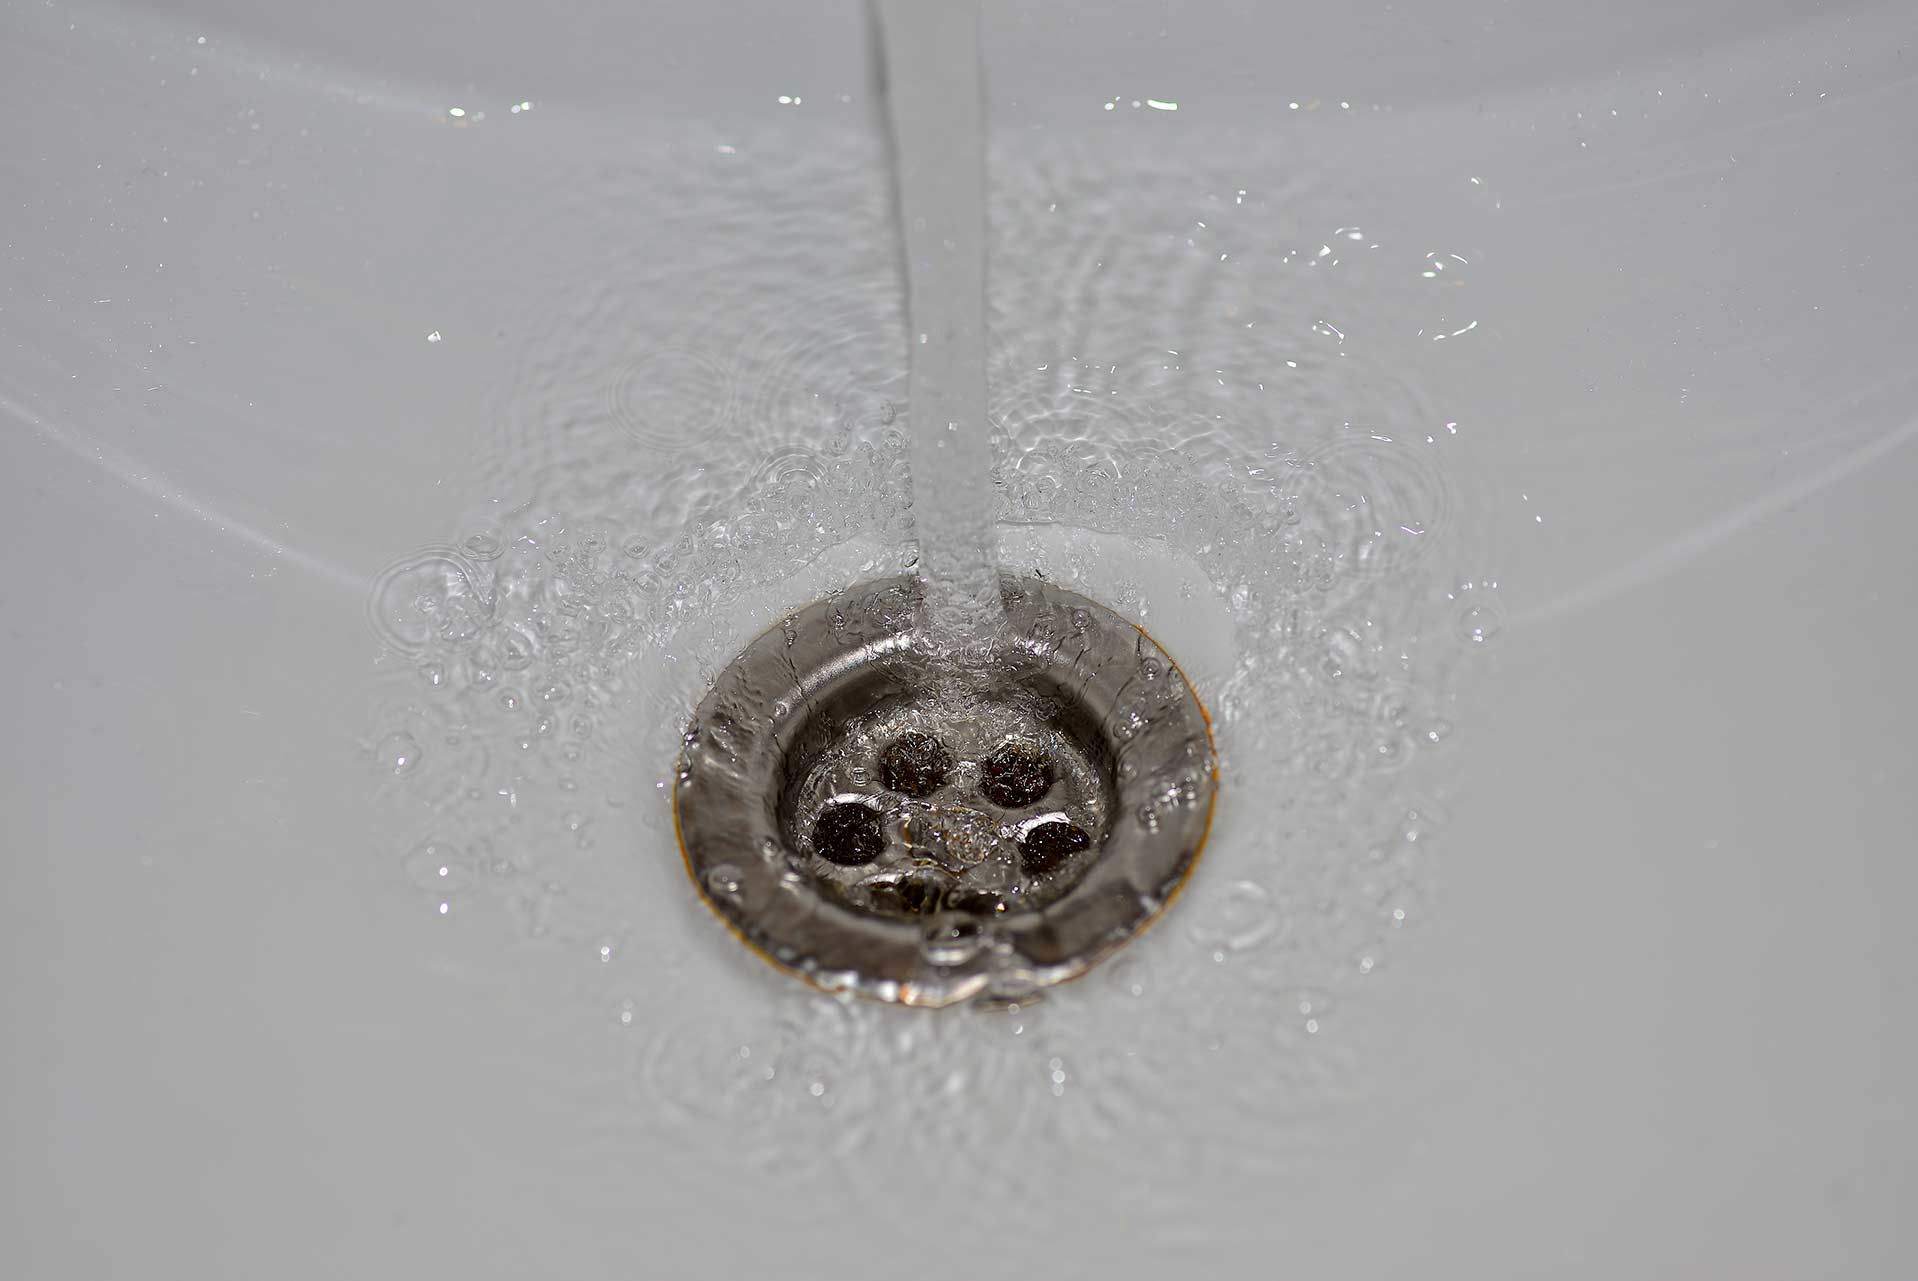 A2B Drains provides services to unblock blocked sinks and drains for properties in Neath.